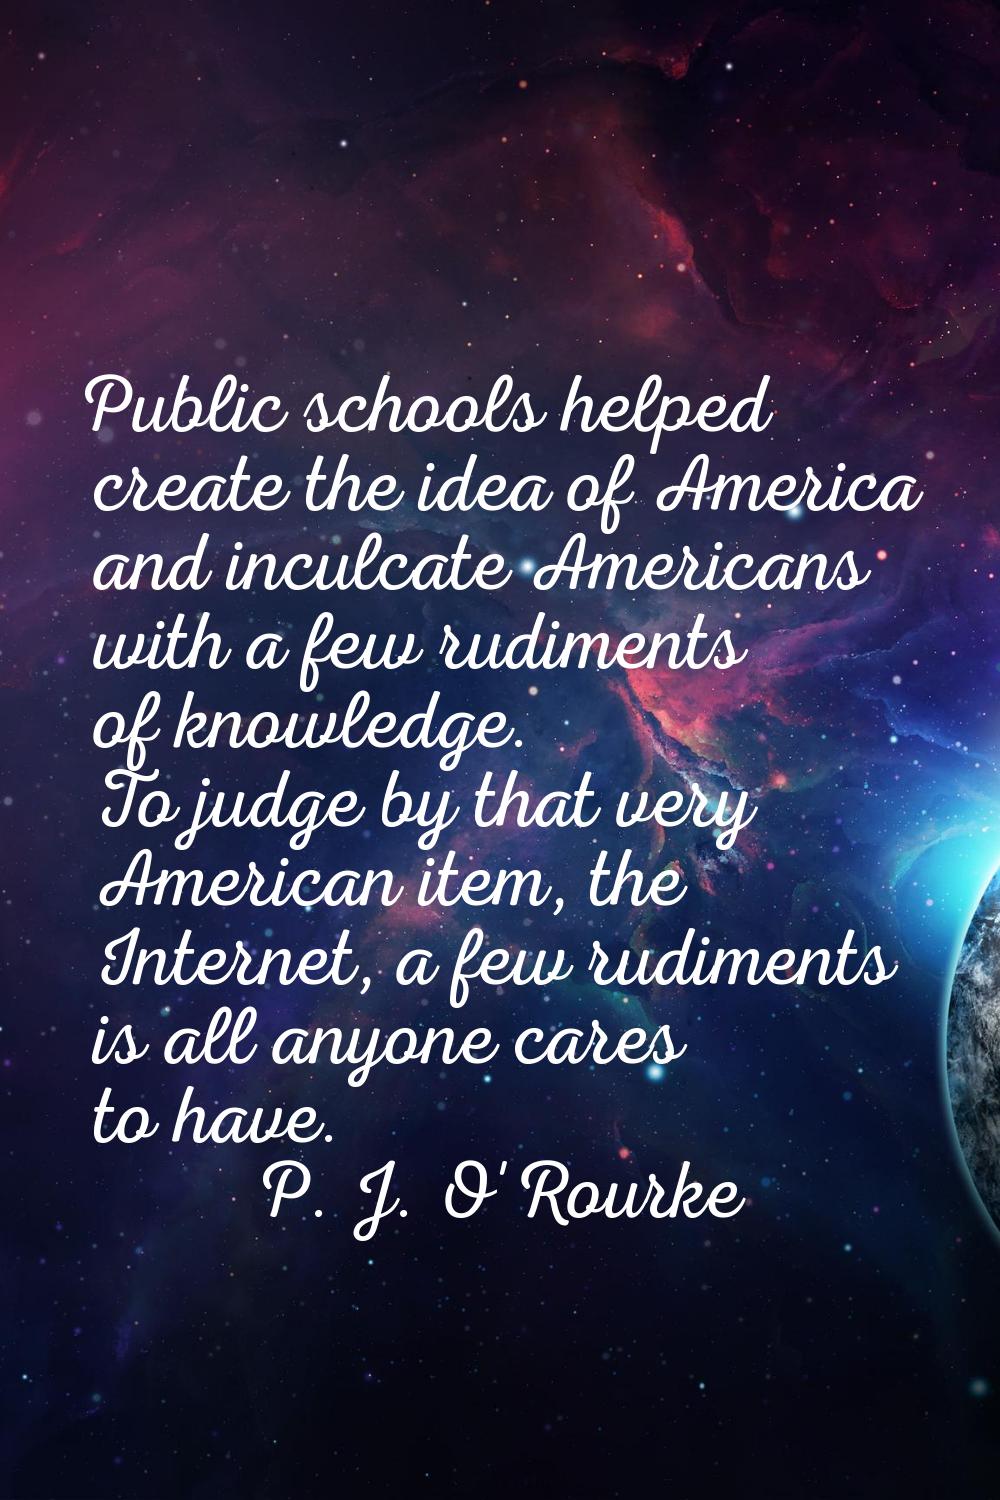 Public schools helped create the idea of America and inculcate Americans with a few rudiments of kn